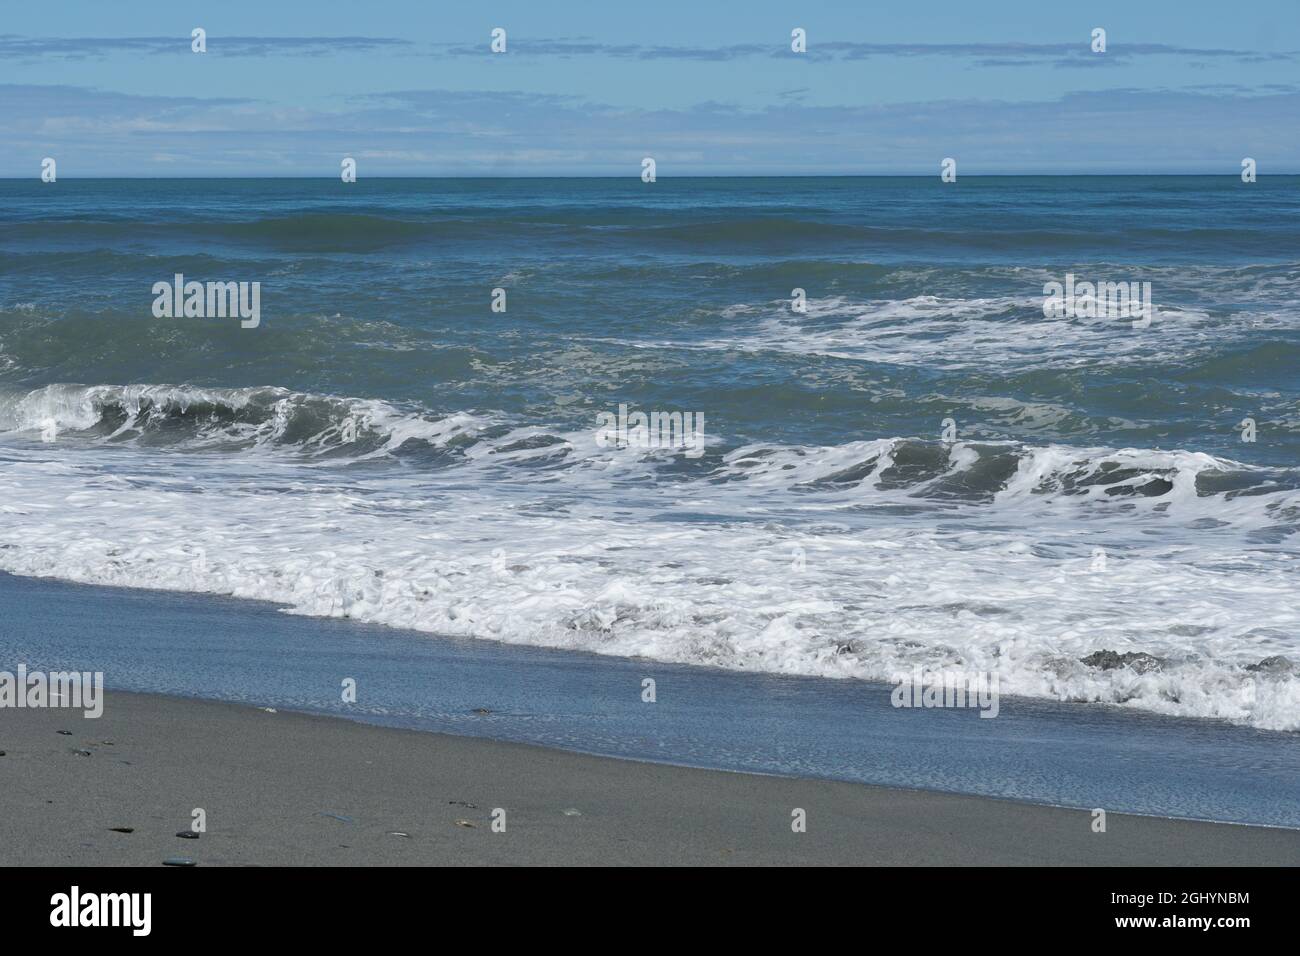 Sea sand and waves at the beach Stock Photo